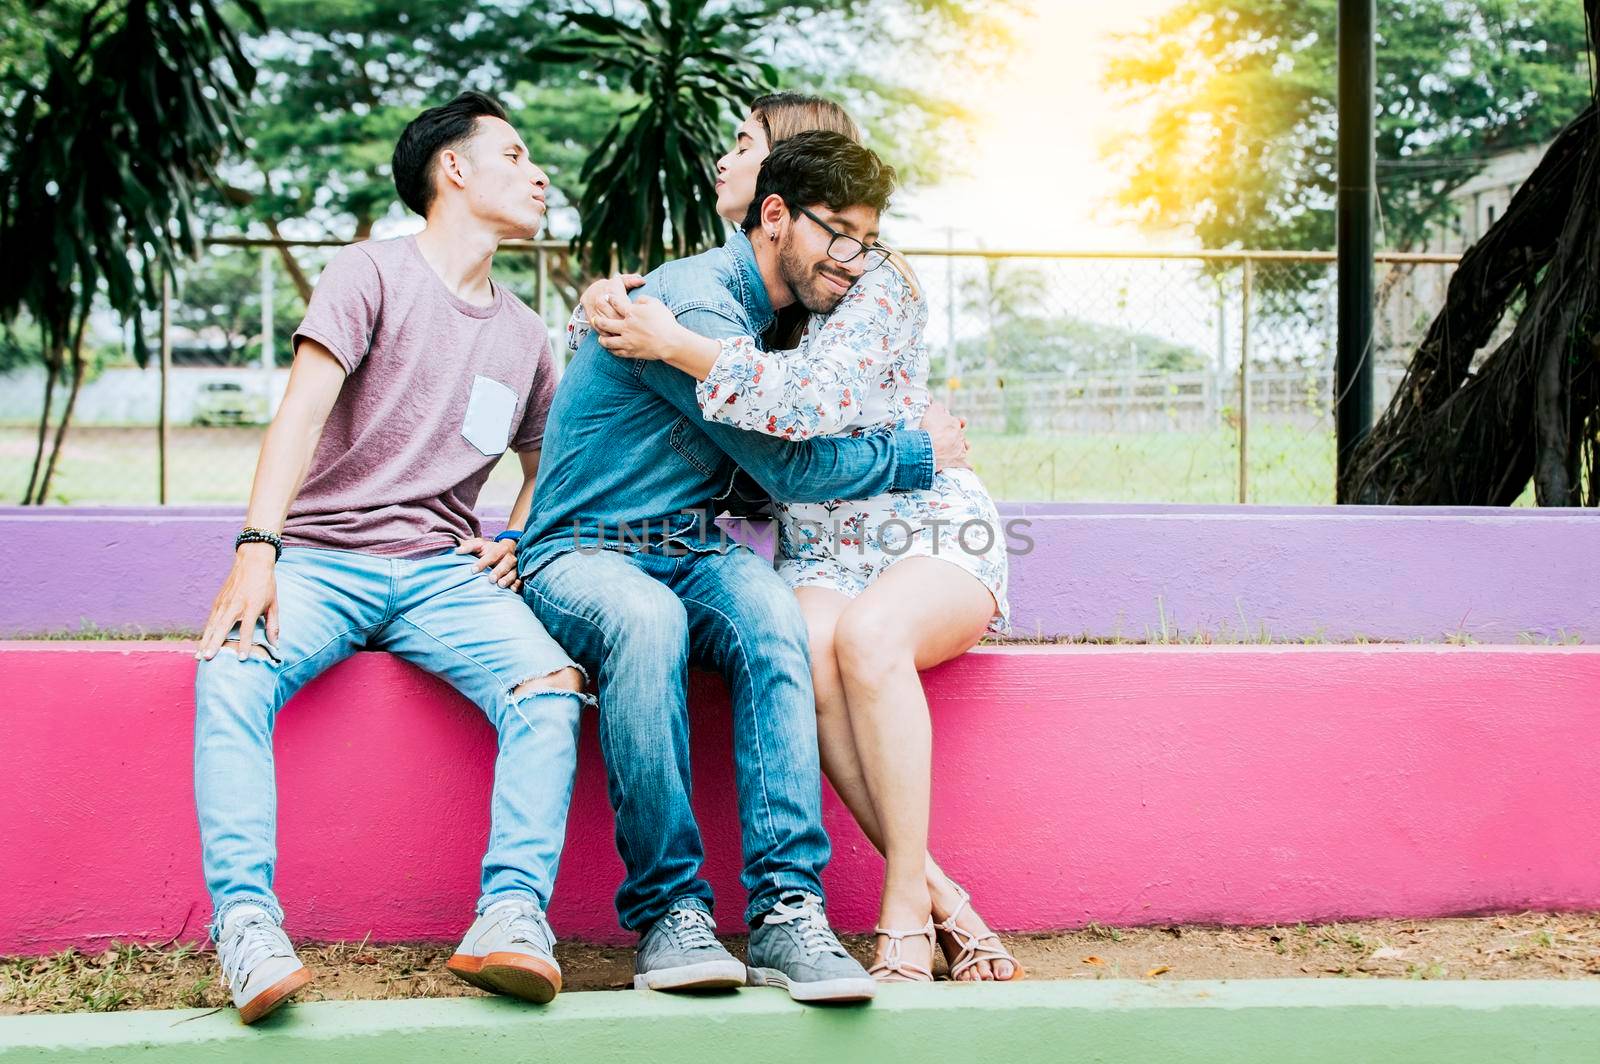 Unfaithful girl sitting hugging her boyfriend and secretly kissing another man. Unfaithful girlfriend hugging her boyfriend in a park secretly kissing another man, Couple infidelity concept by isaiphoto